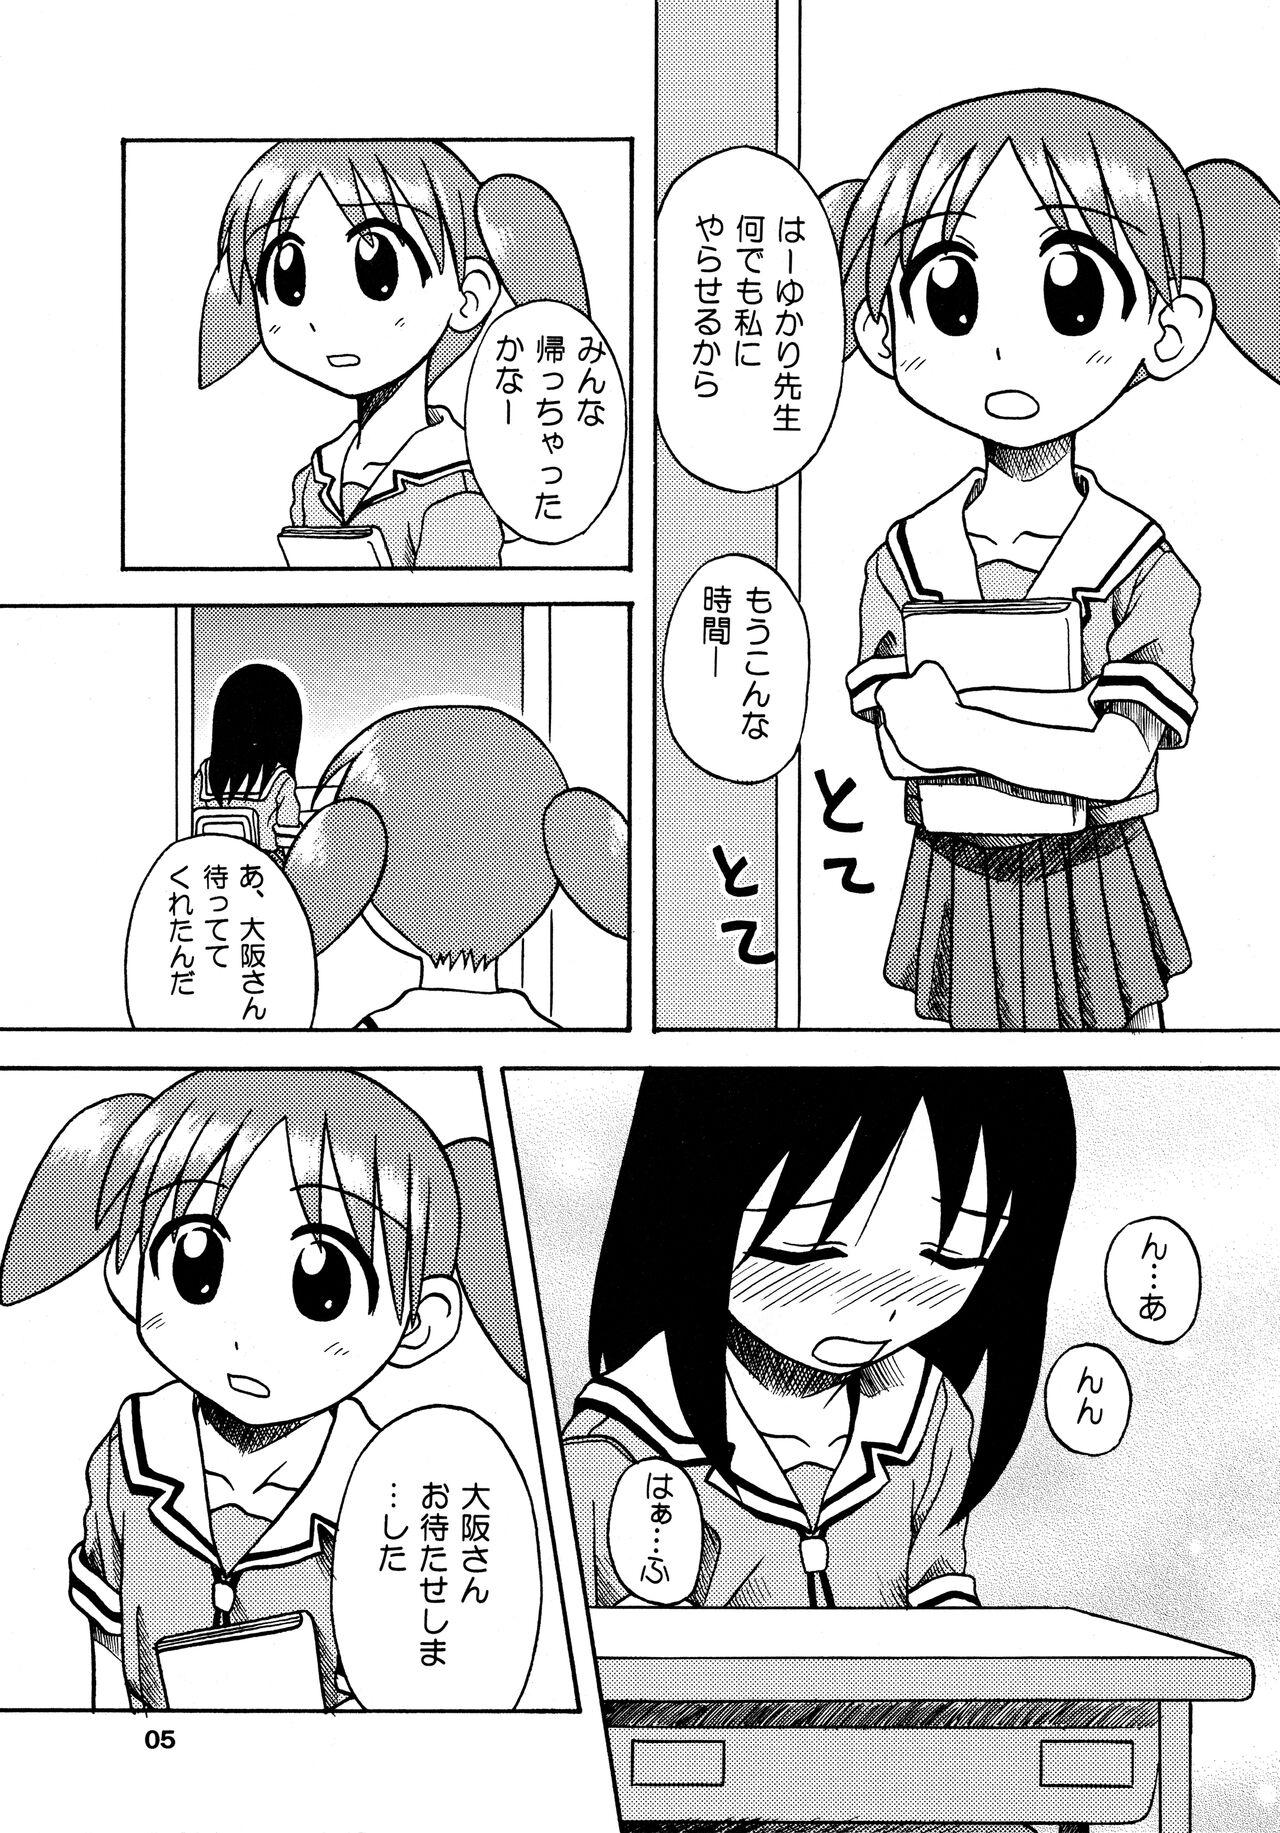 Hood ANOTHER LIFE - Azumanga daioh Pack - Page 5